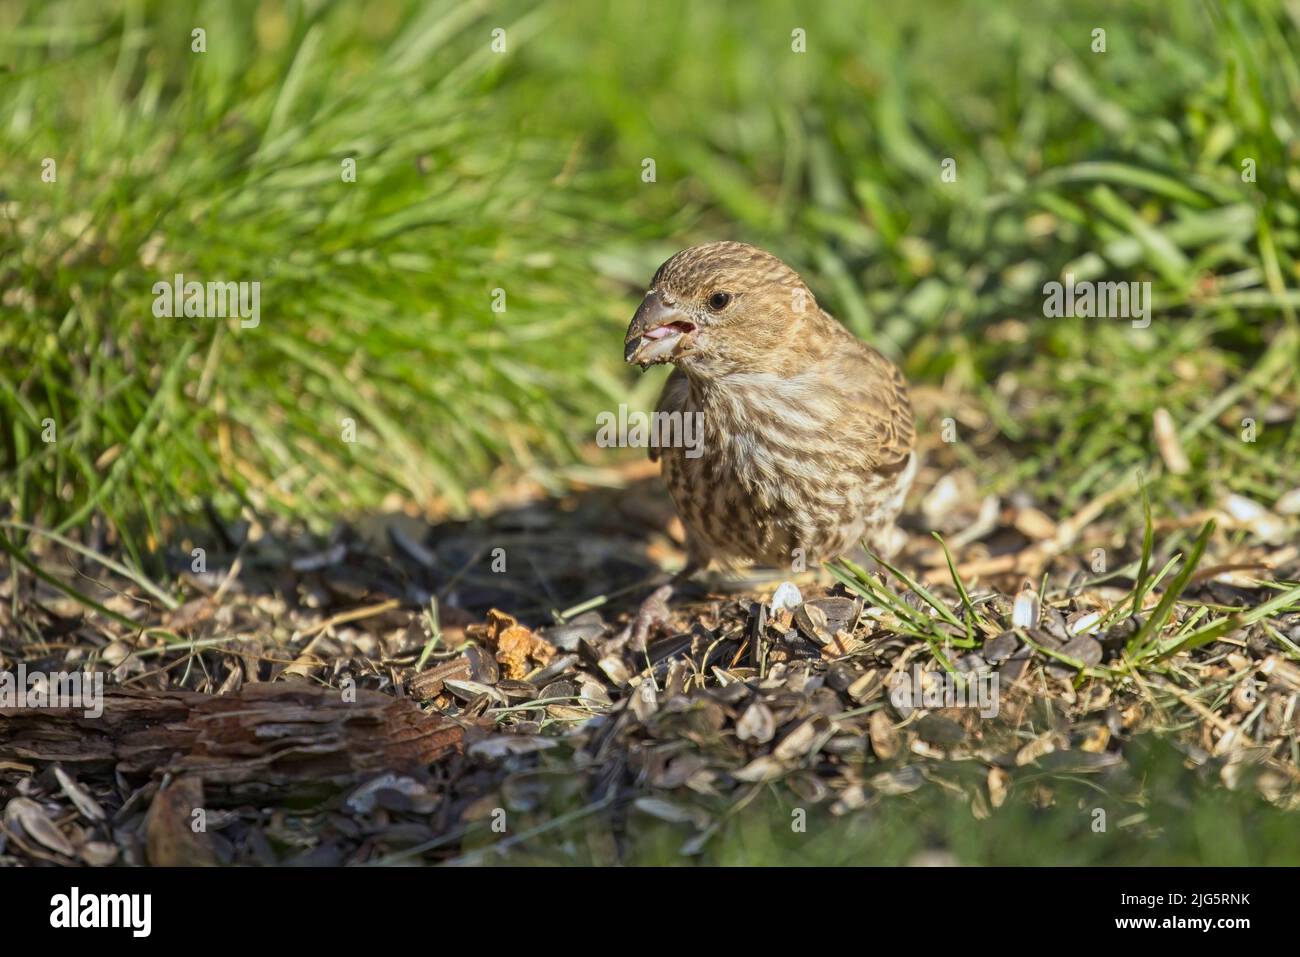 A small sparrow is on the ground searching for food in Rathdrum, Idaho. Stock Photo